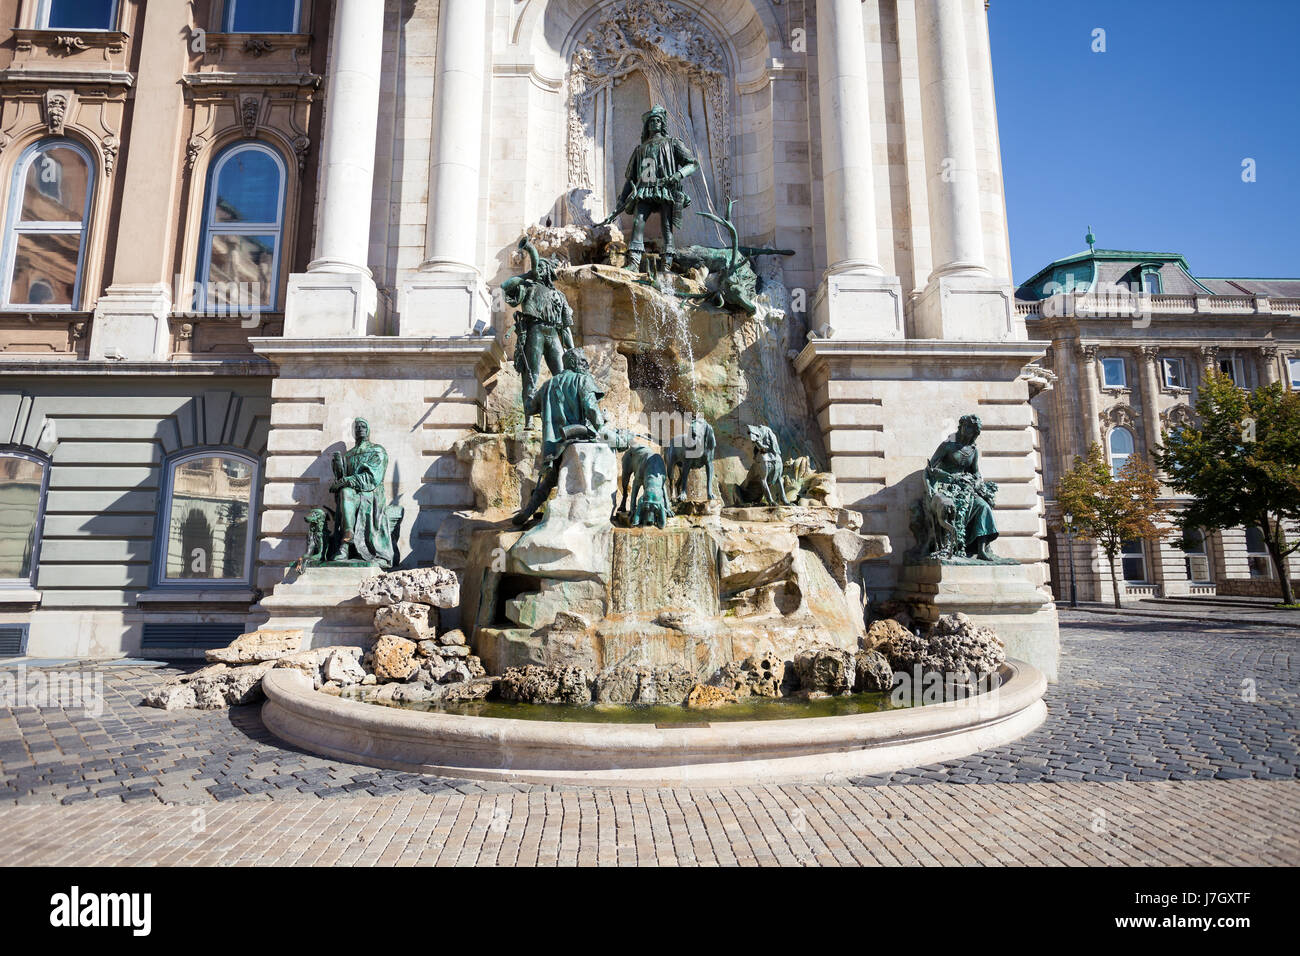 Matthias Fountain in the northwest courtyard of the Buda Castle Royal Palace, Budapest, Hungary Stock Photo